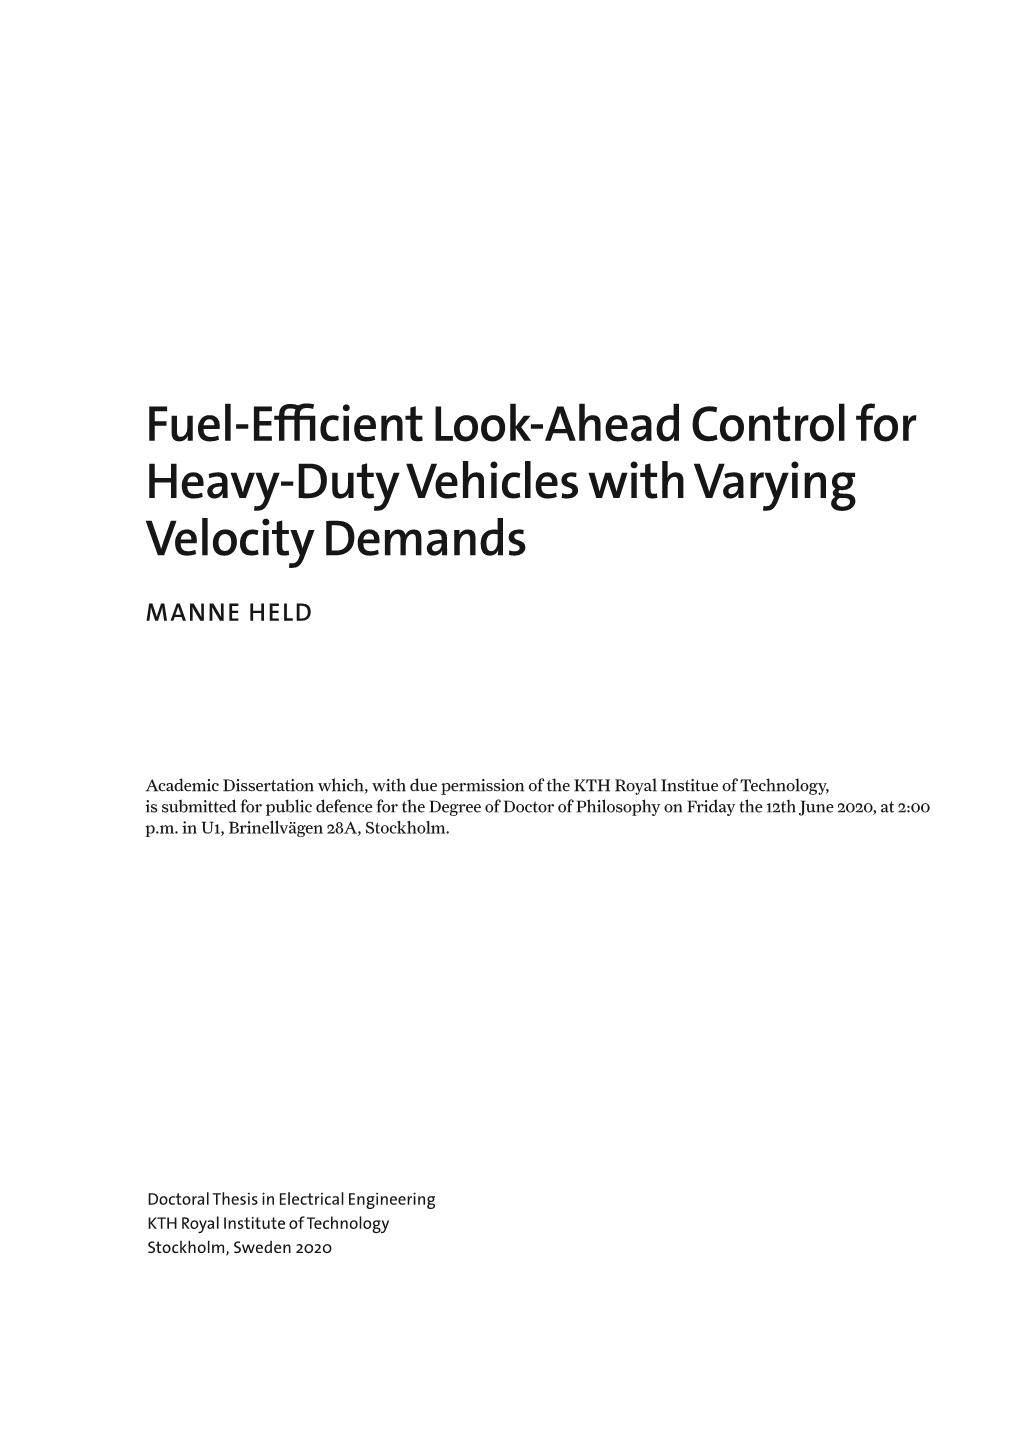 Fuel-E Cient Look-Ahead Control for Heavy-Duty Vehicles with Varying